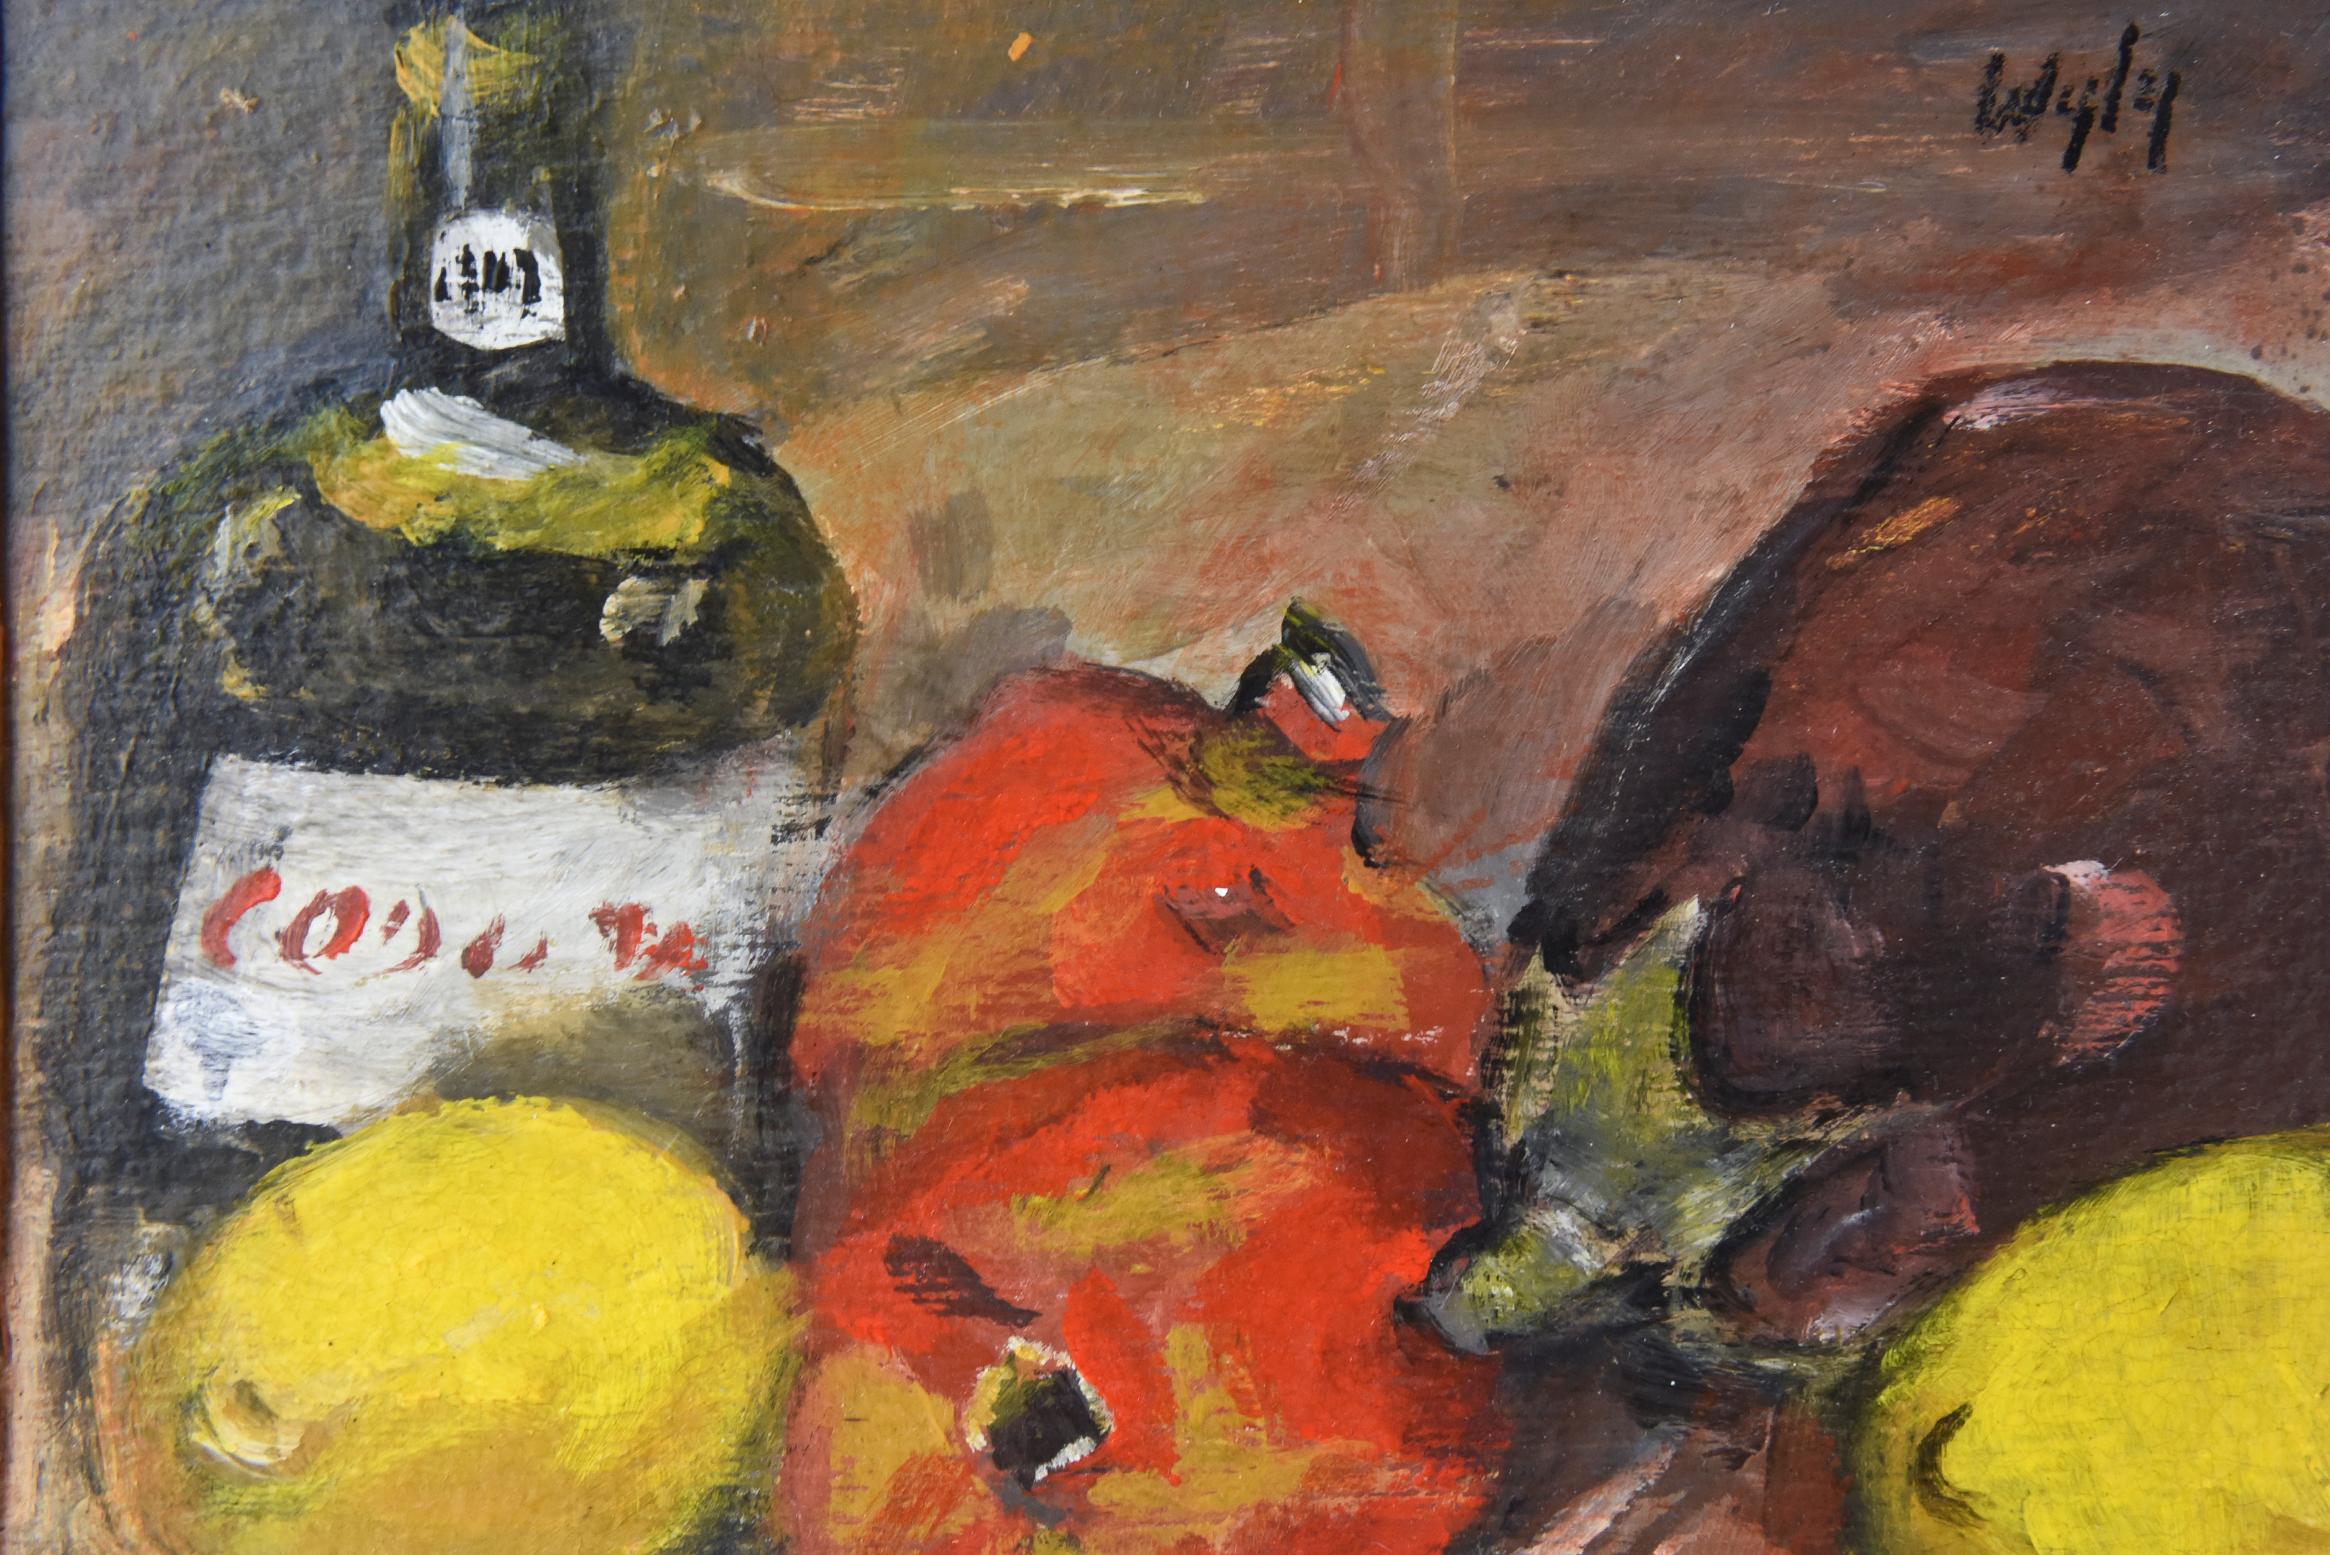 Still life acrylic on board painting of a bottle and fruit. Signed 